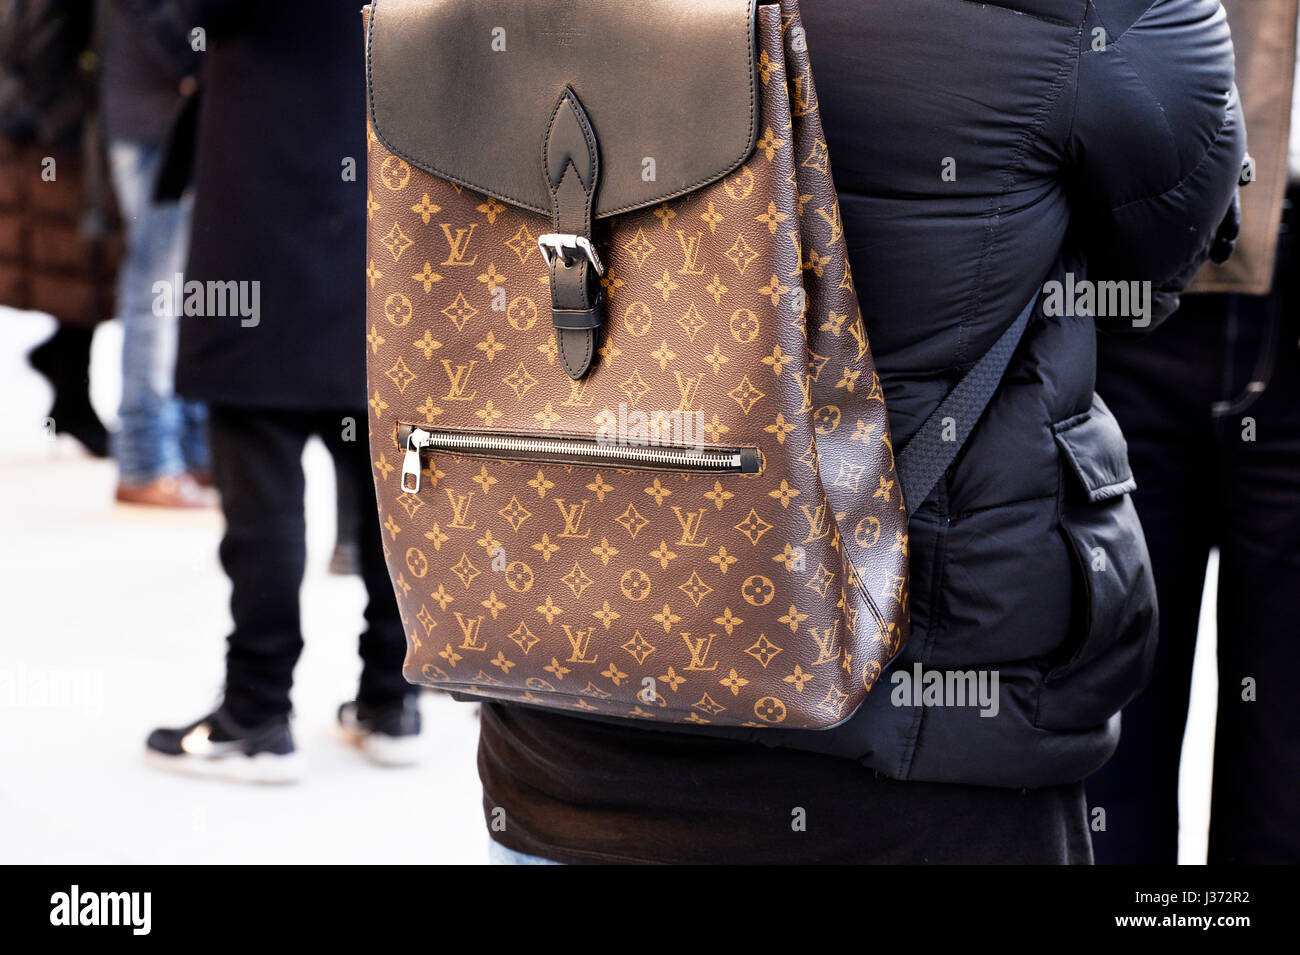 LOUIS VUITTON - Fashion - THE BACKPACK COLLECTION